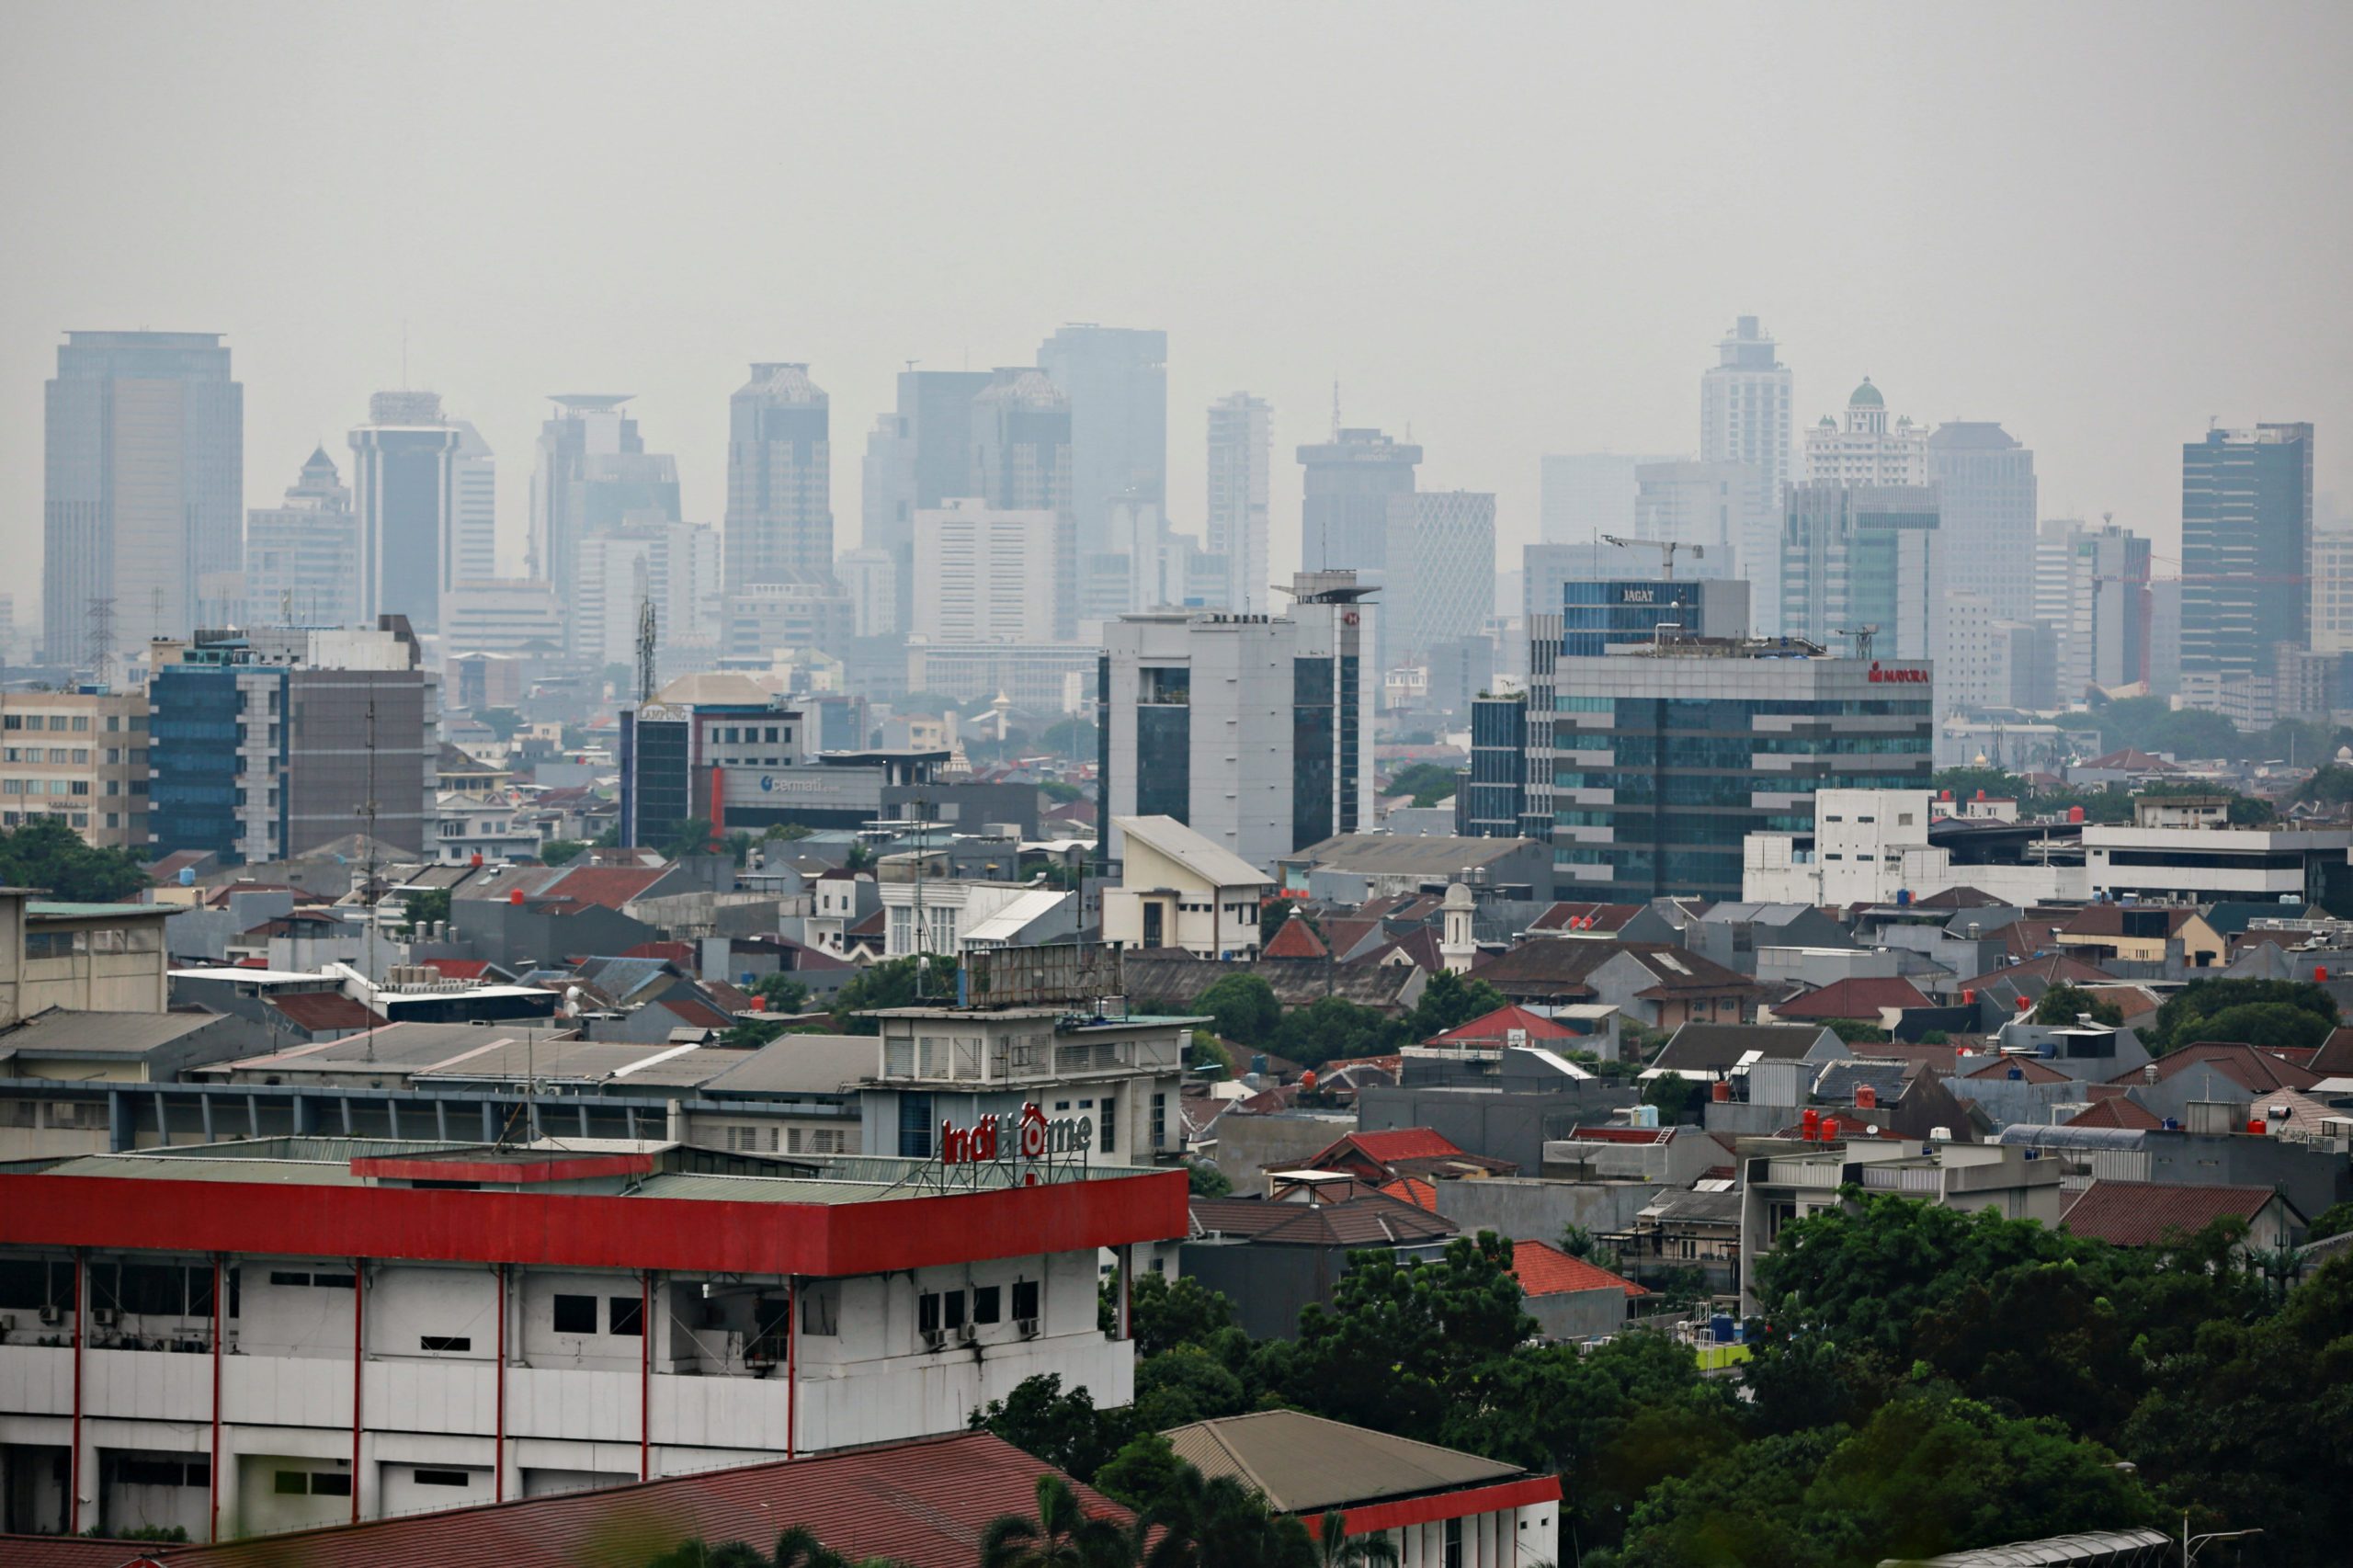 ID Digest: INA ties up with Manulife IM; East Ventures, Kadin launch GHG calculator